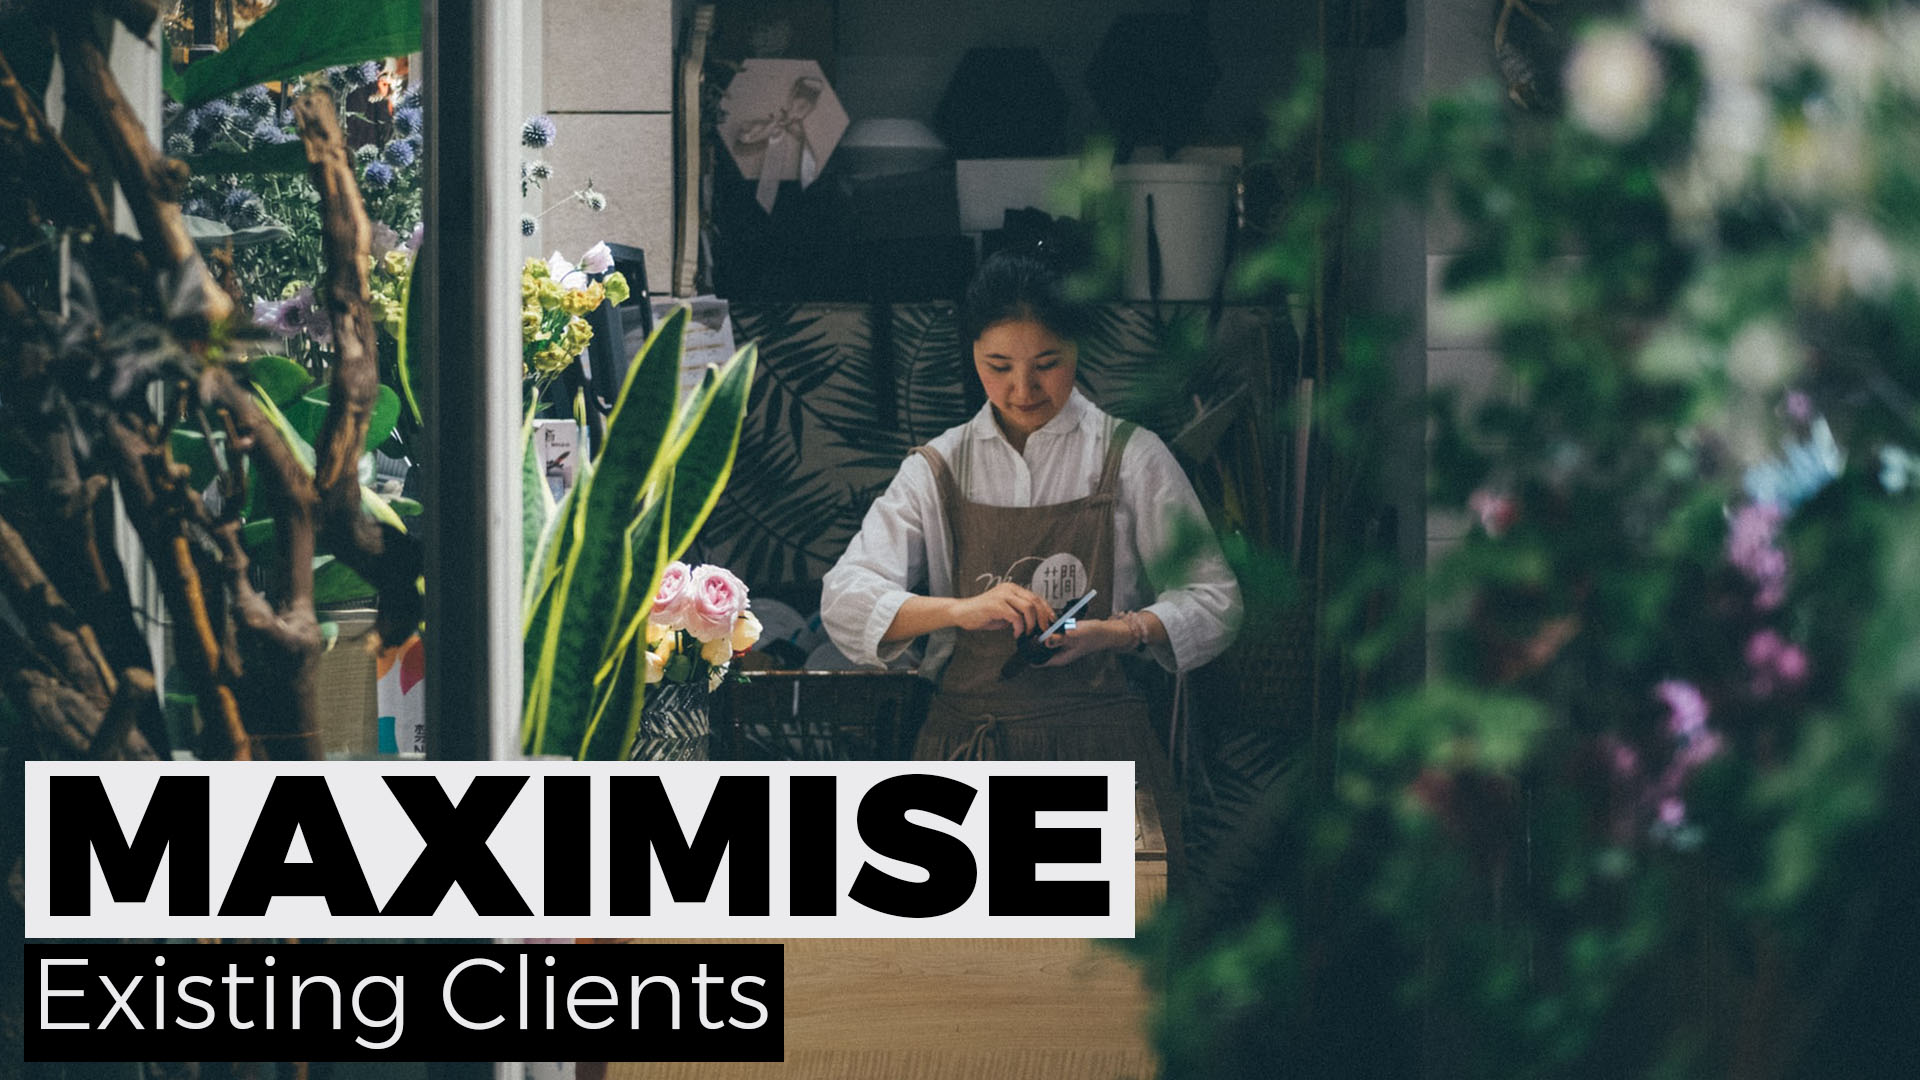 Maximise Existing Clients – Brad Turville